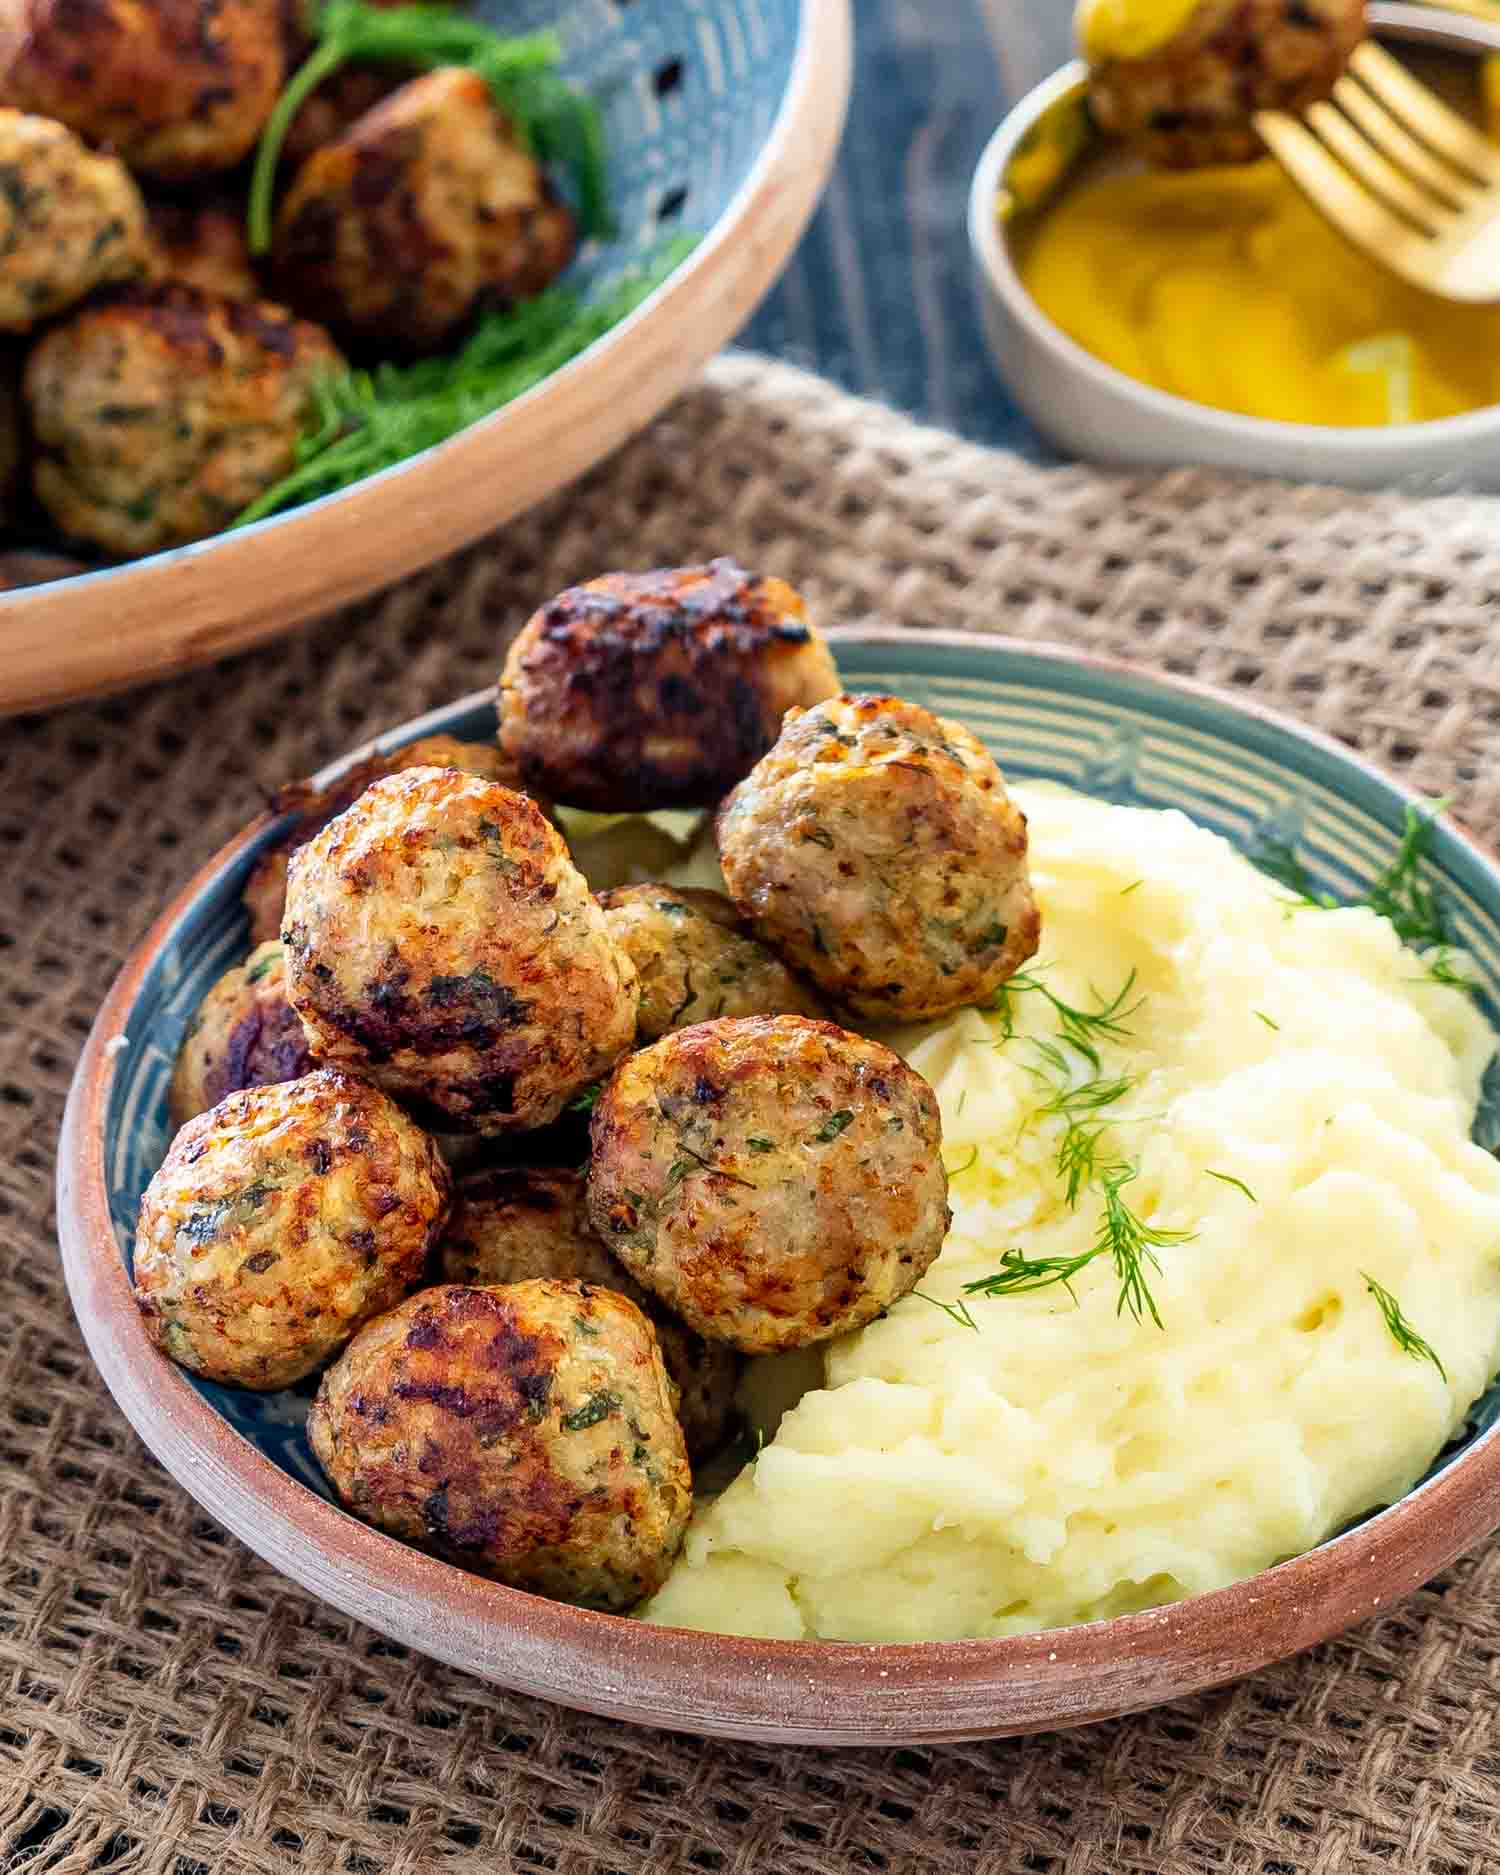 Romanian meatballs with mashed potatoes in a clay plate garnished with dill.